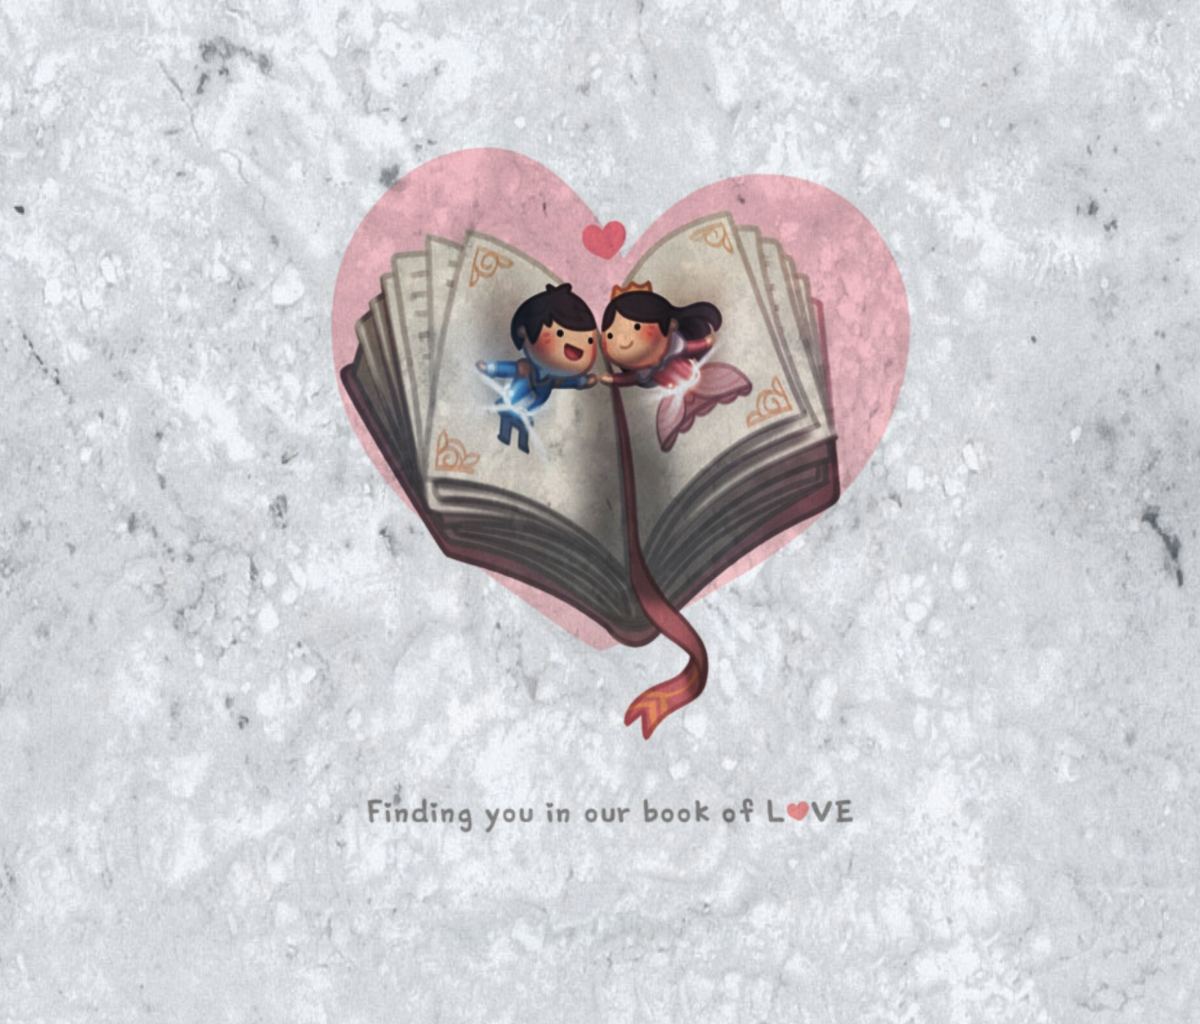 Love Is Finding You In Our Book Of Love wallpaper 1200x1024